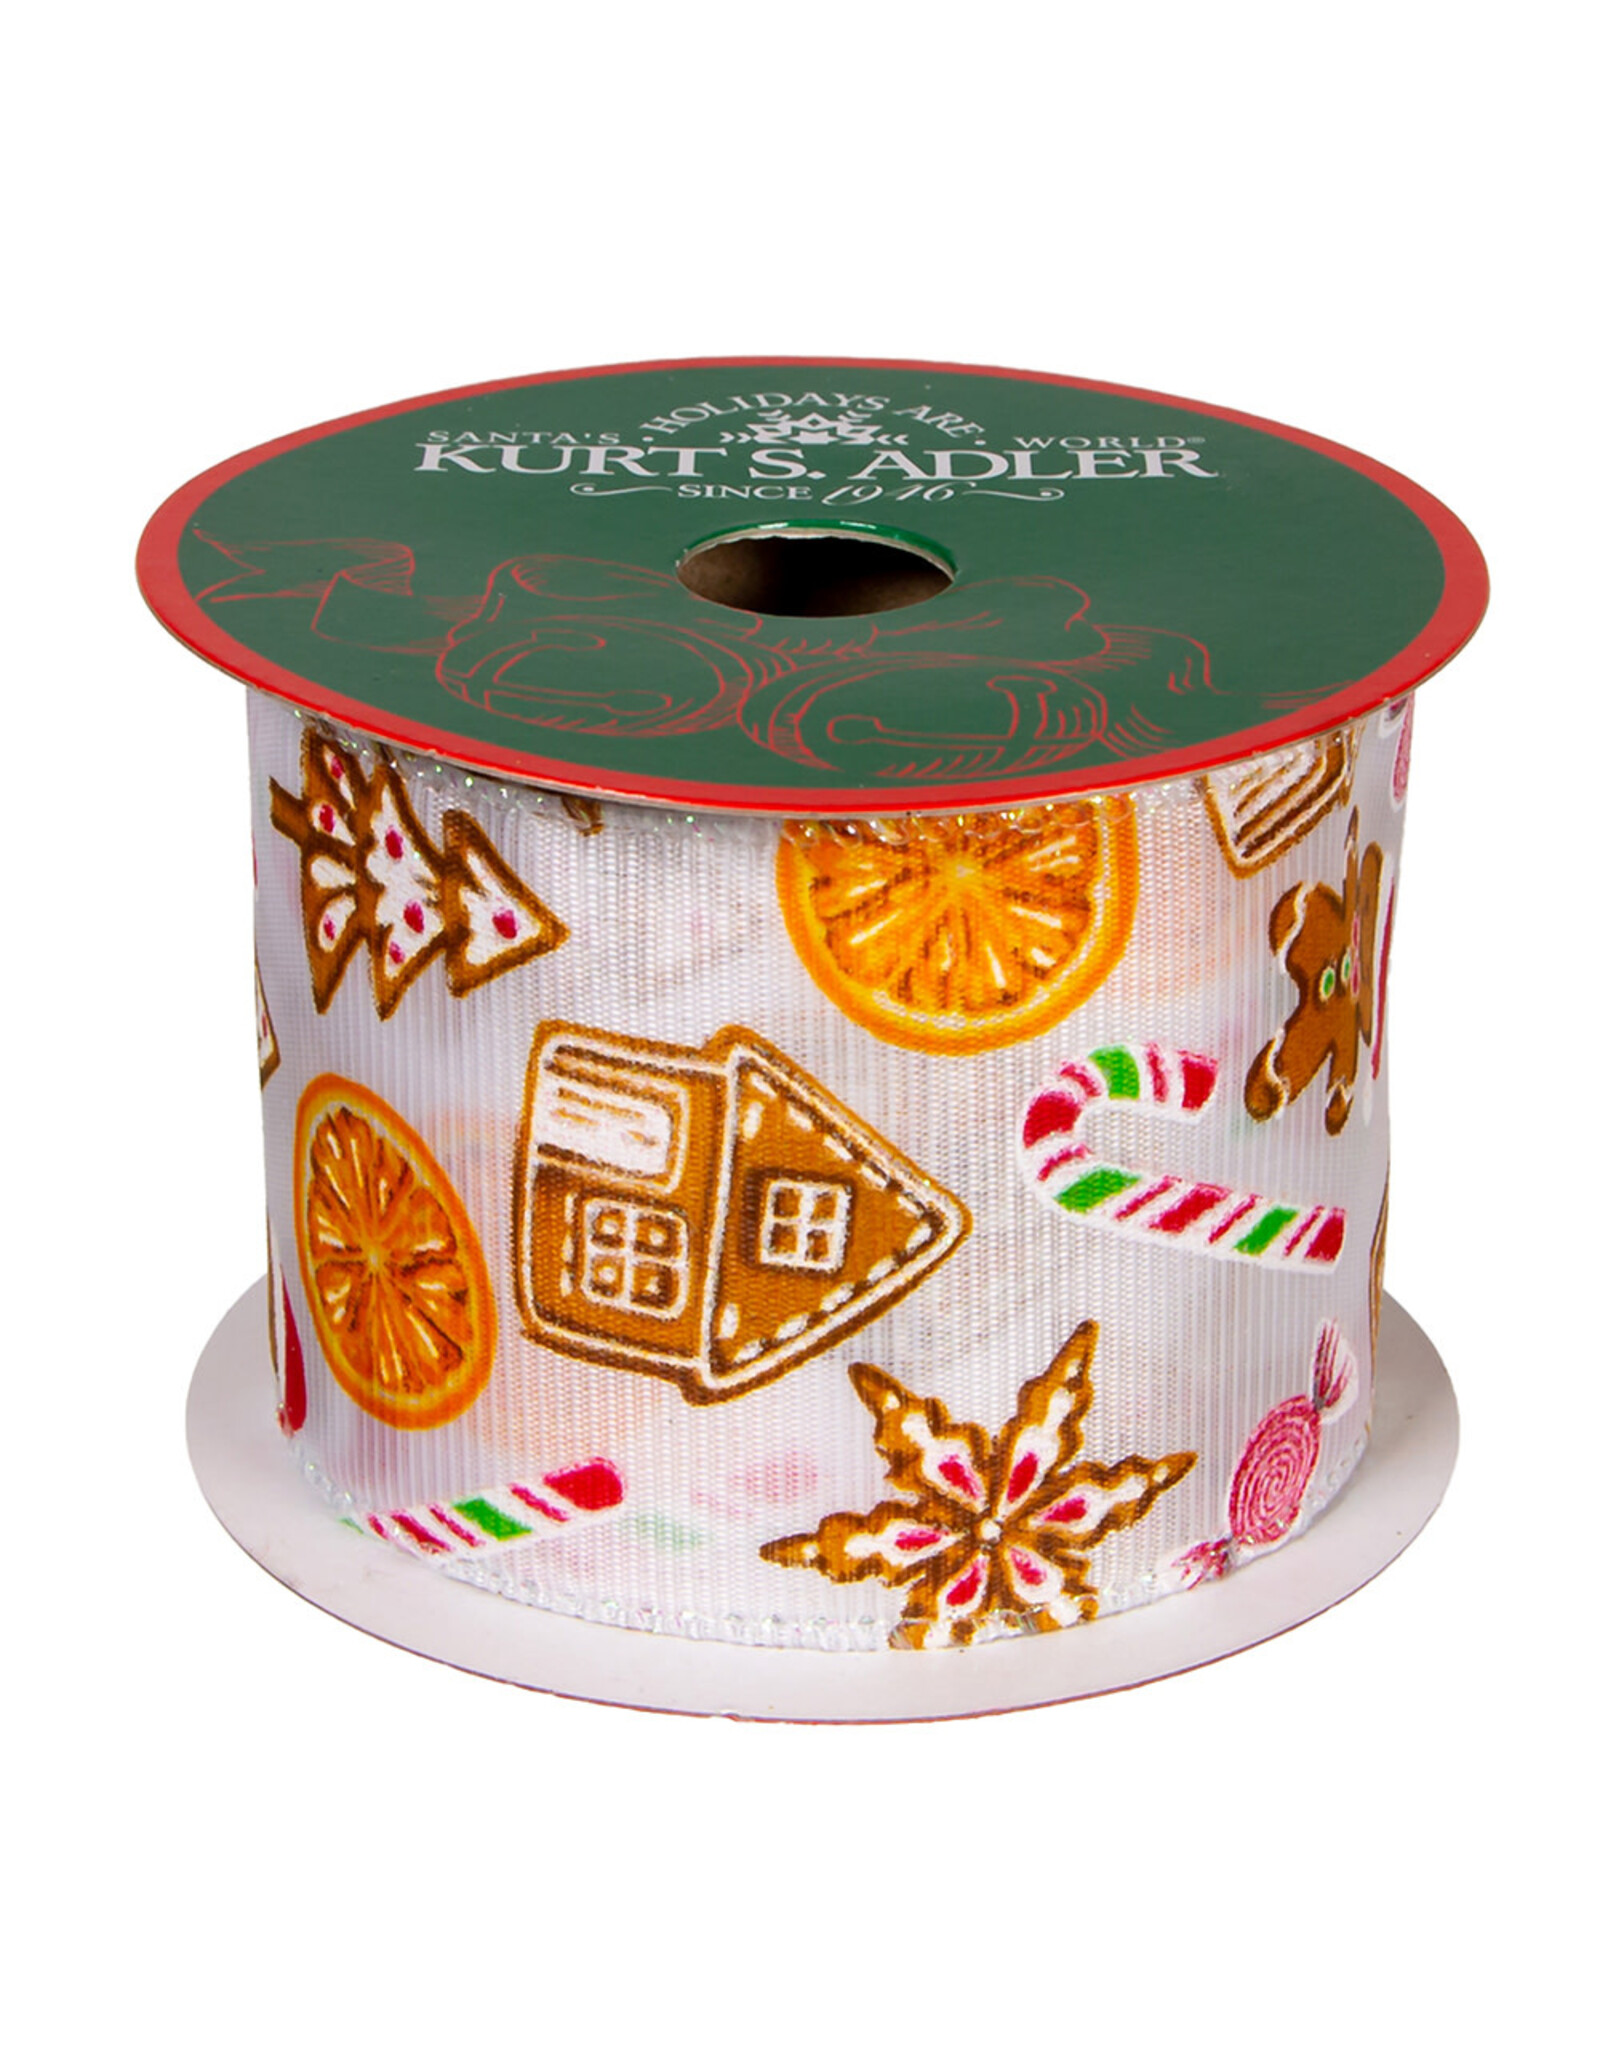 Kurt Adler Off-White Gingerbread Double Wire Ribbon 2.5x10 Yards